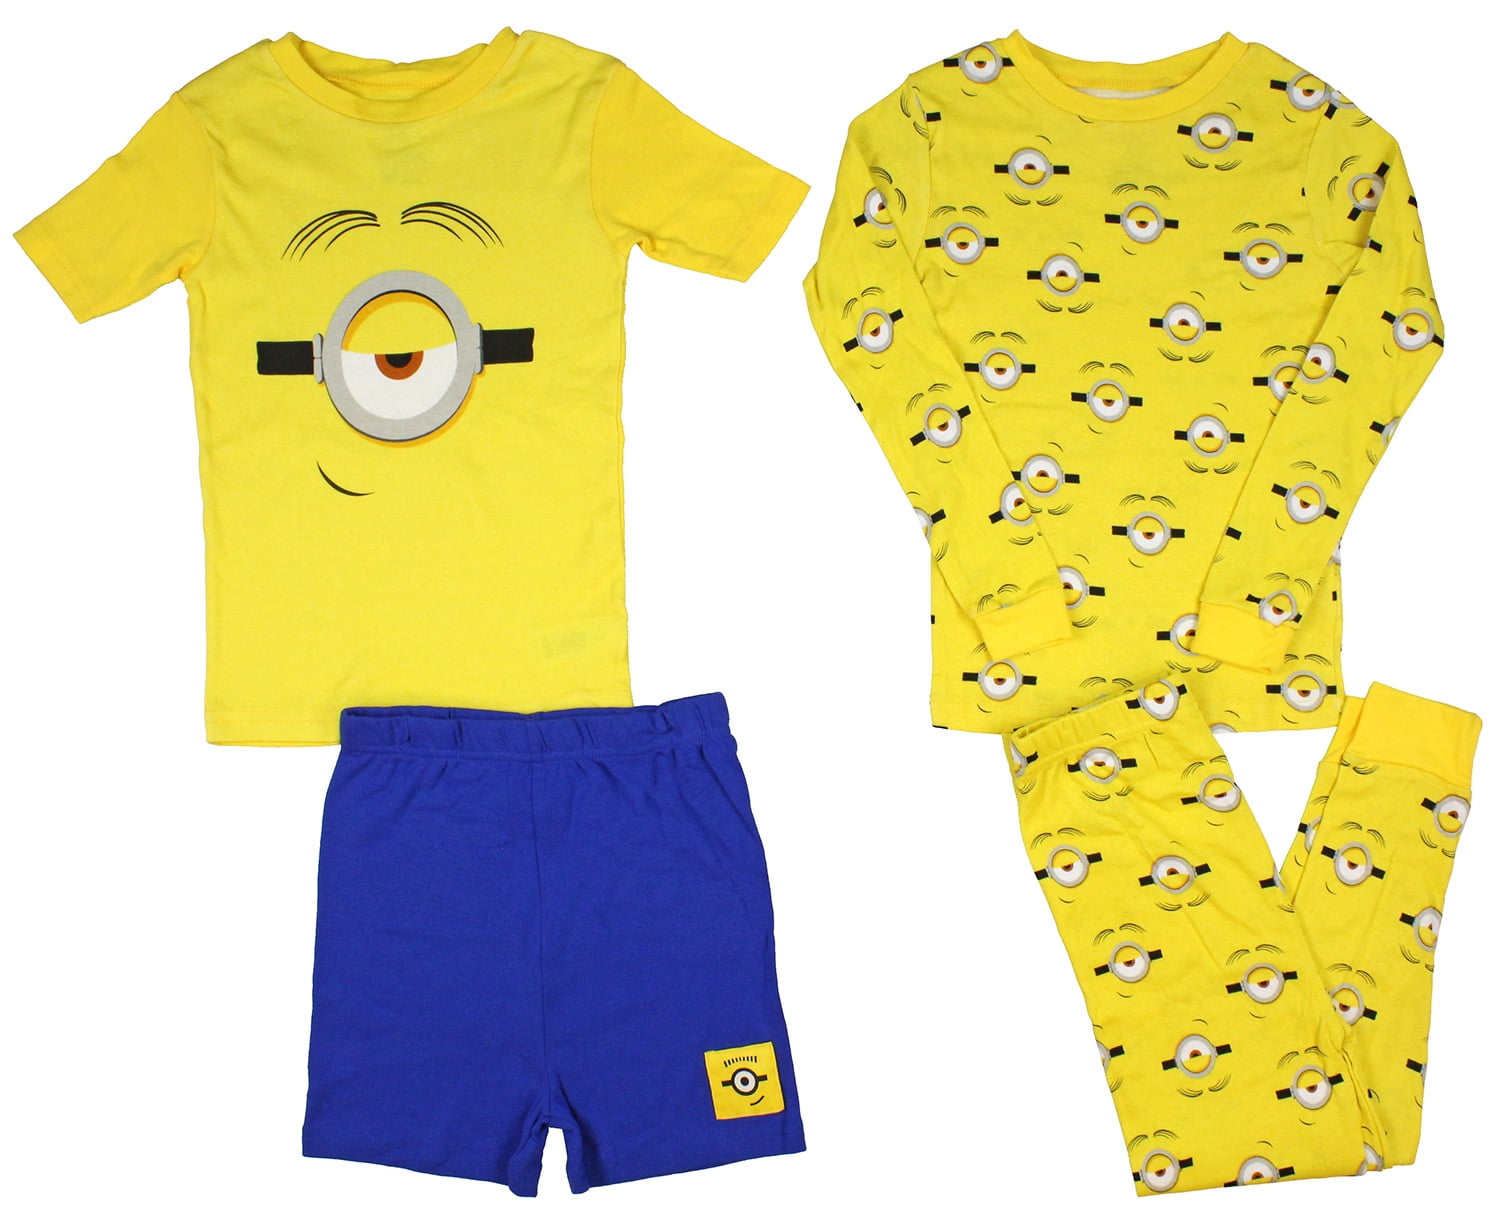 Girls Kids Official Licensed Minions Despicable Me Long Sleeve Pyjamas PJs